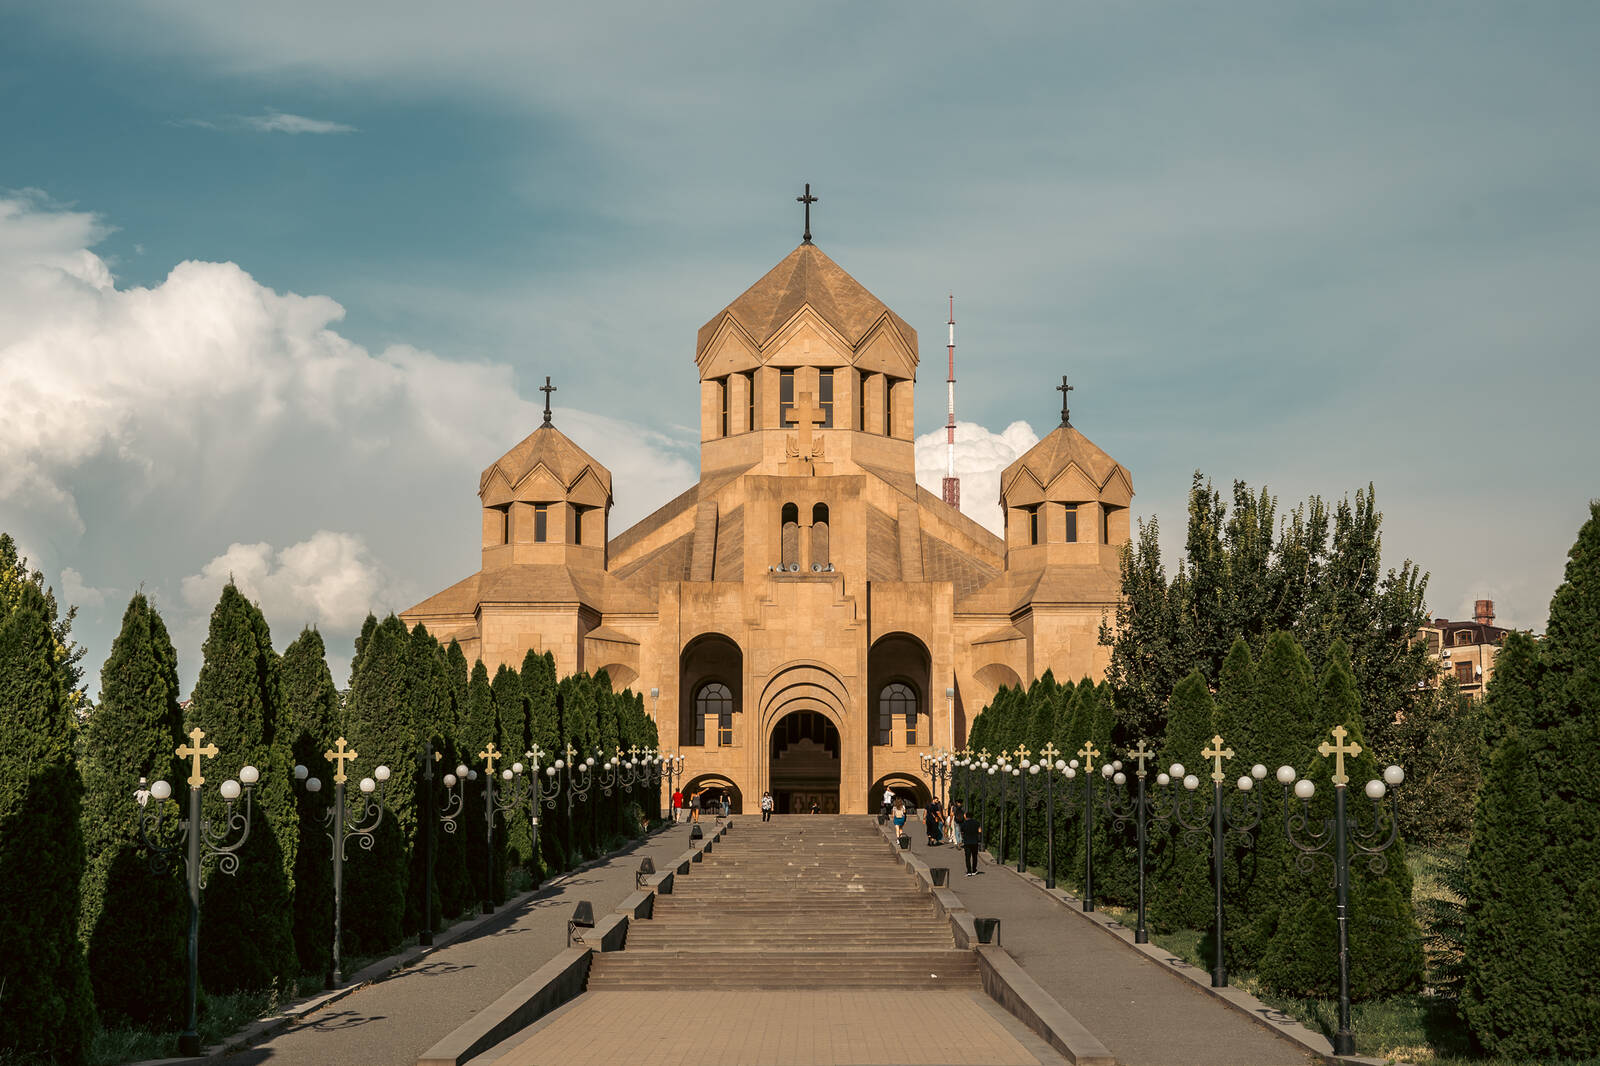 Image of Saint Gregory the Illuminator - Yerevan Cathedral by James Billings.